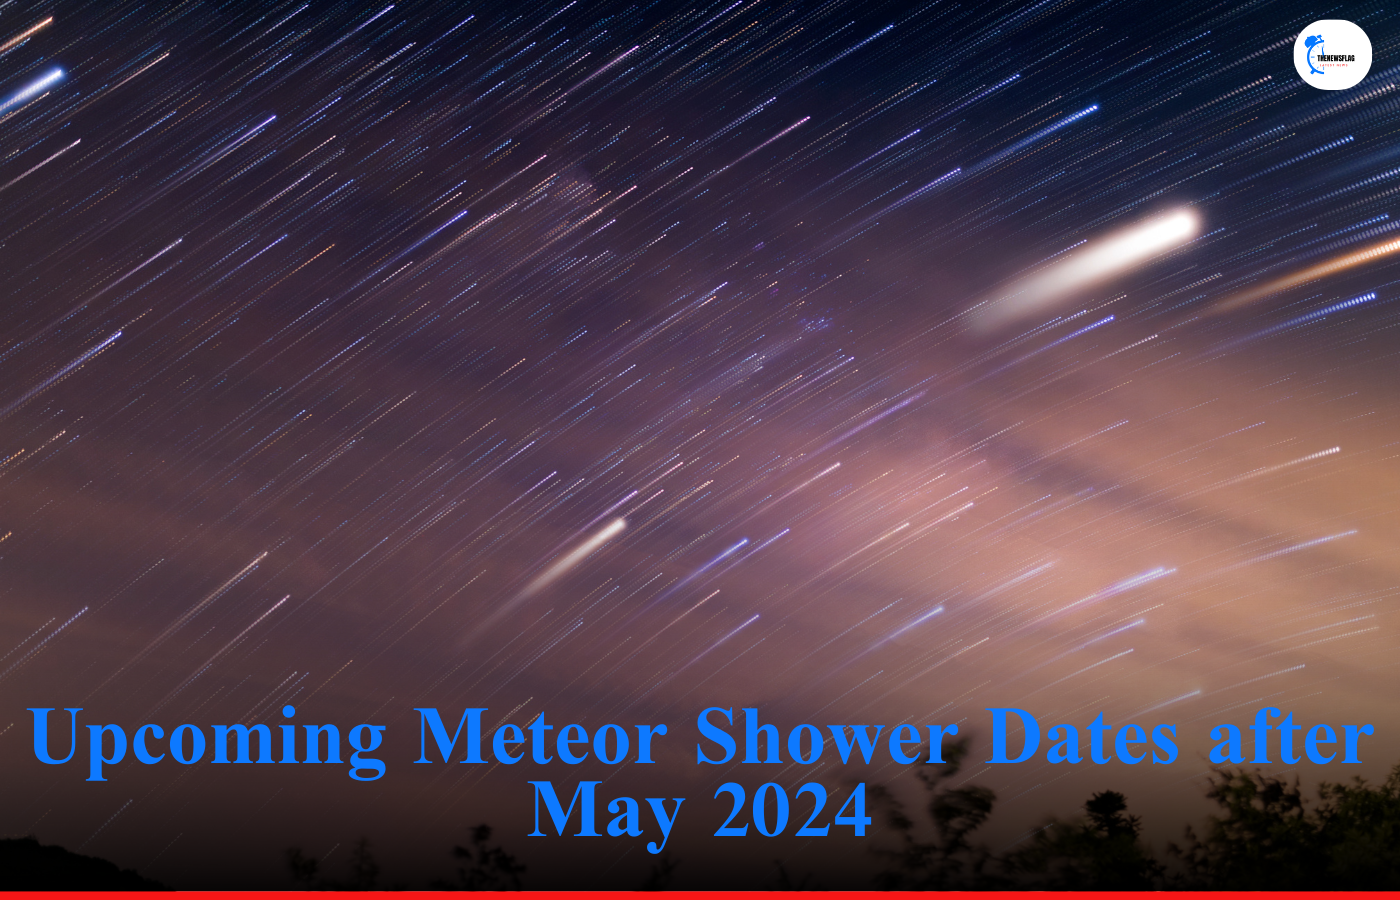 Upcoming Meteor Shower Dates after May 2024